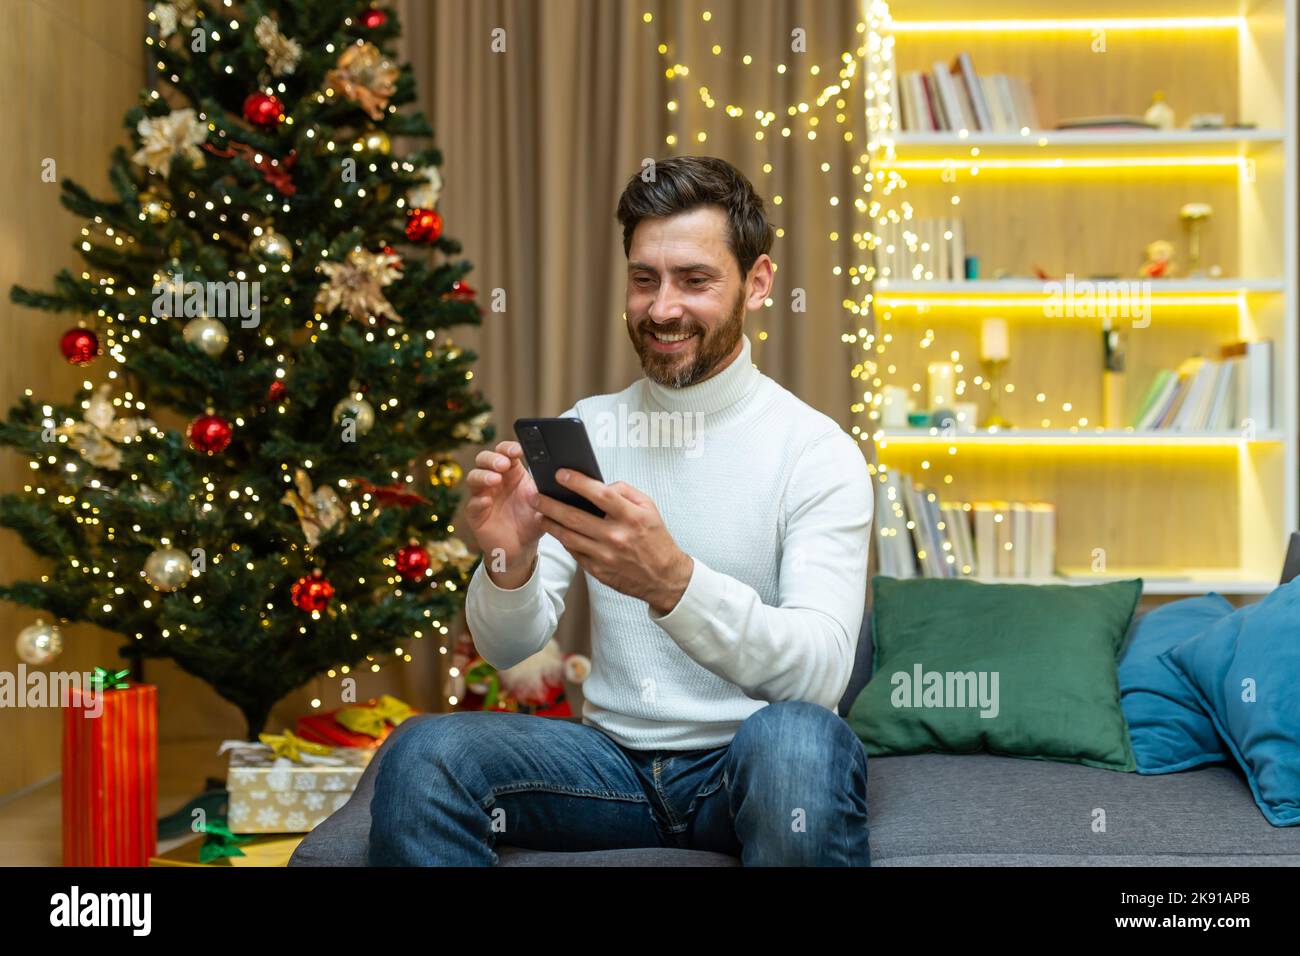 Cheerful man at home uses the phone, celebrates Christmas and New Year sitting on the sofa near the Christmas tree, types messages and browses online on the Internet. Stock Photo